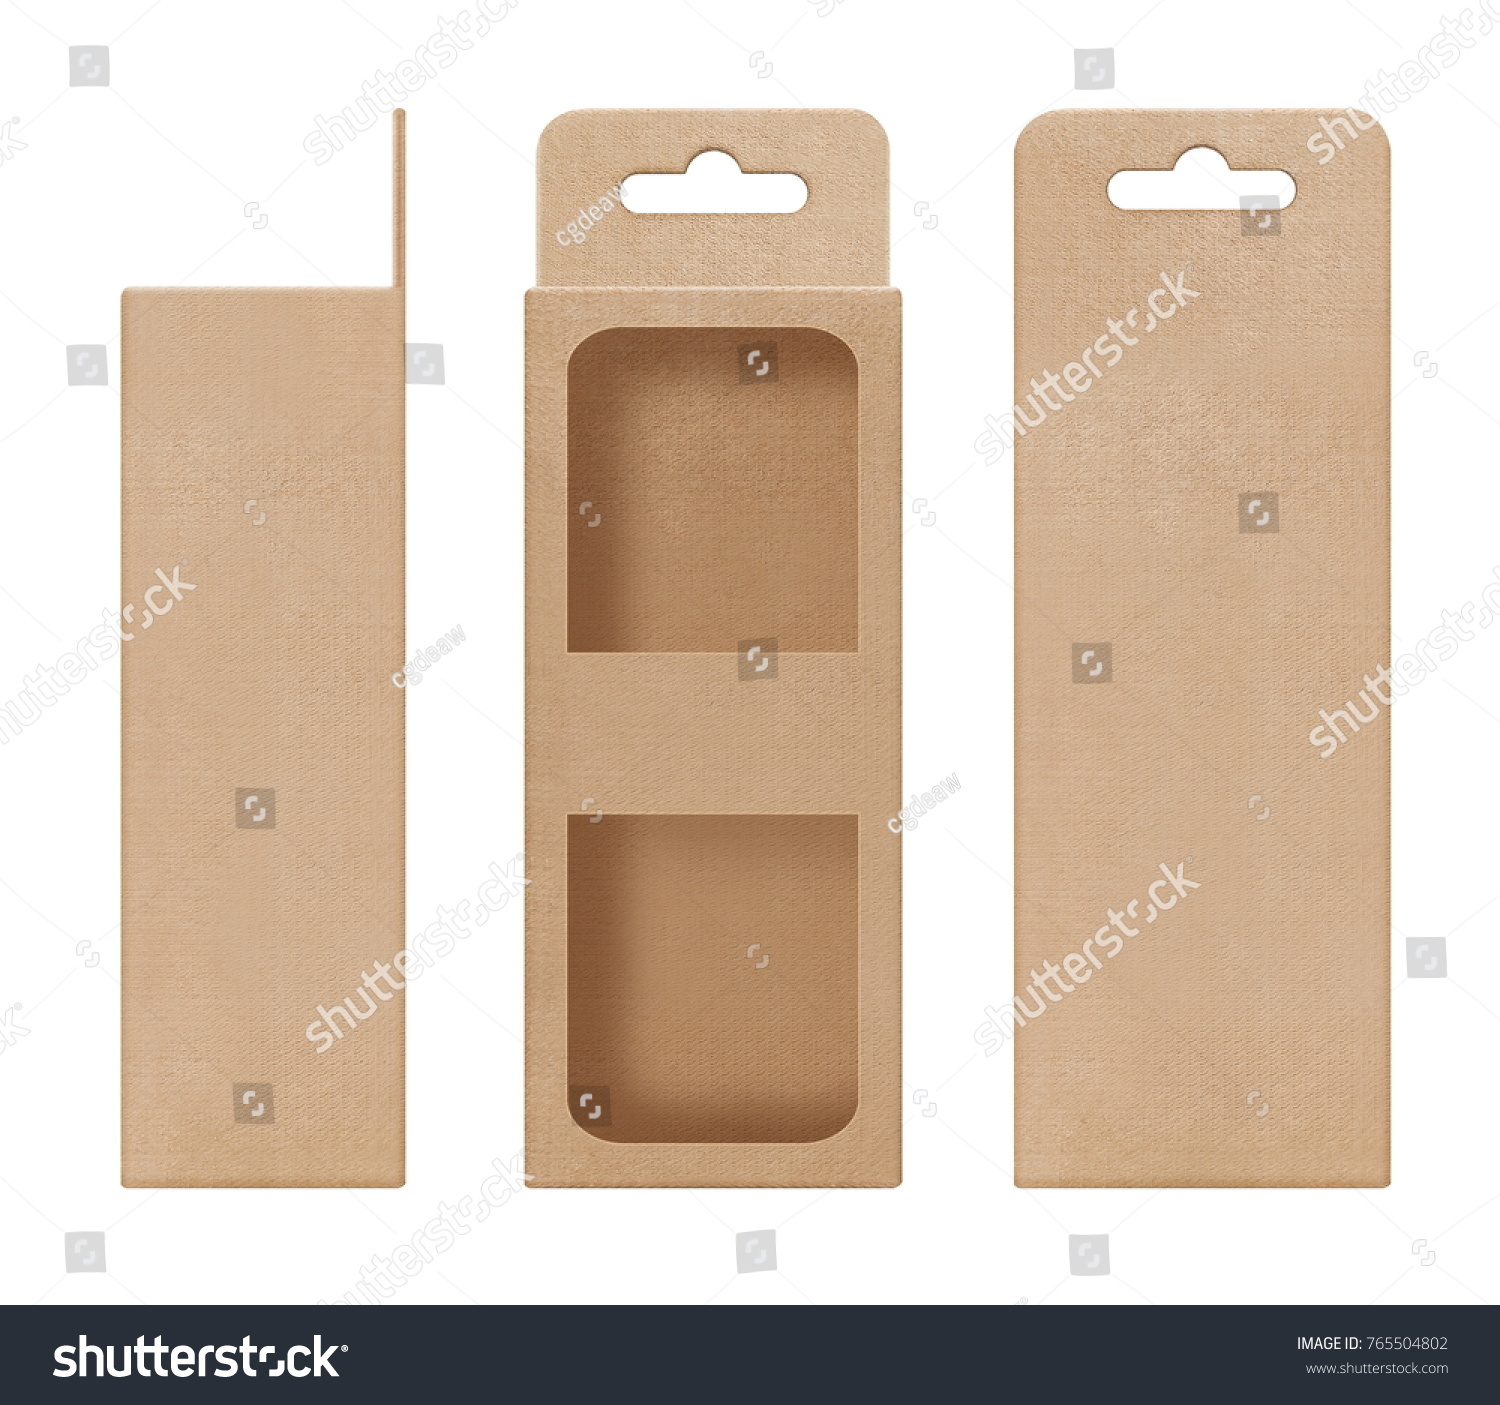 box, packaging, box brown for hanging cut out window open blank template for design product package #765504802